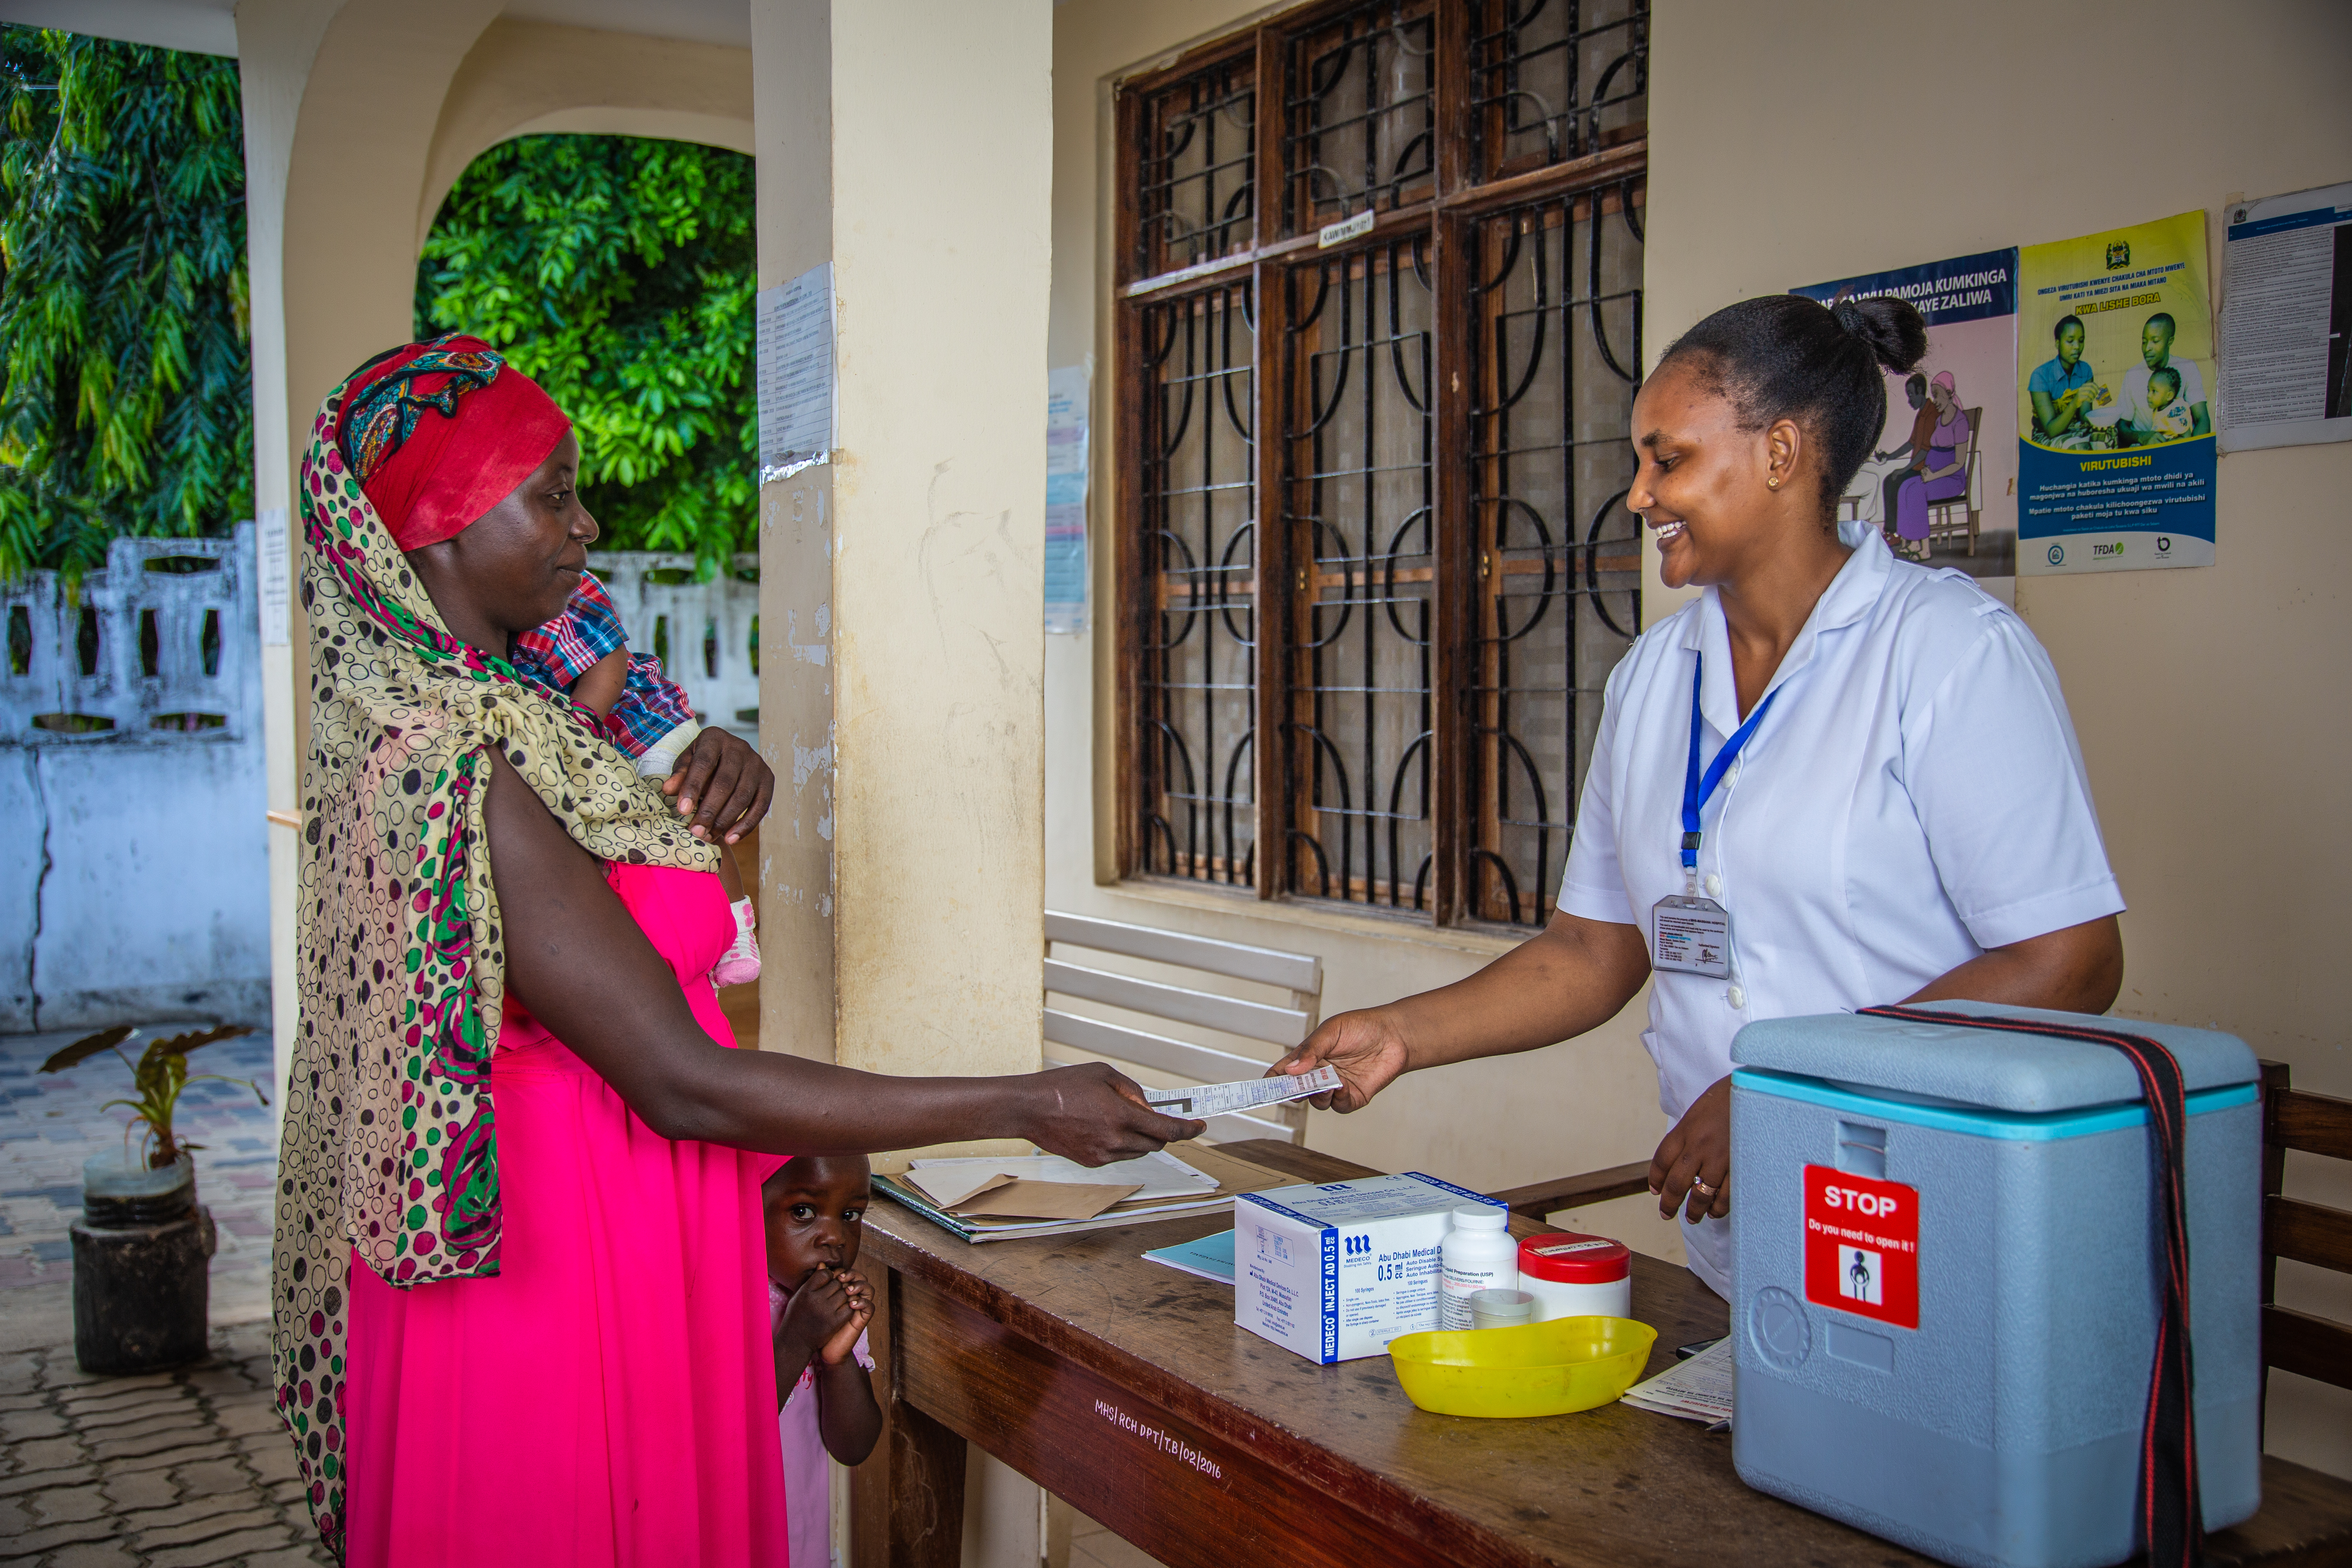 A health worker in Tanzania provides information to a woman holding a baby.